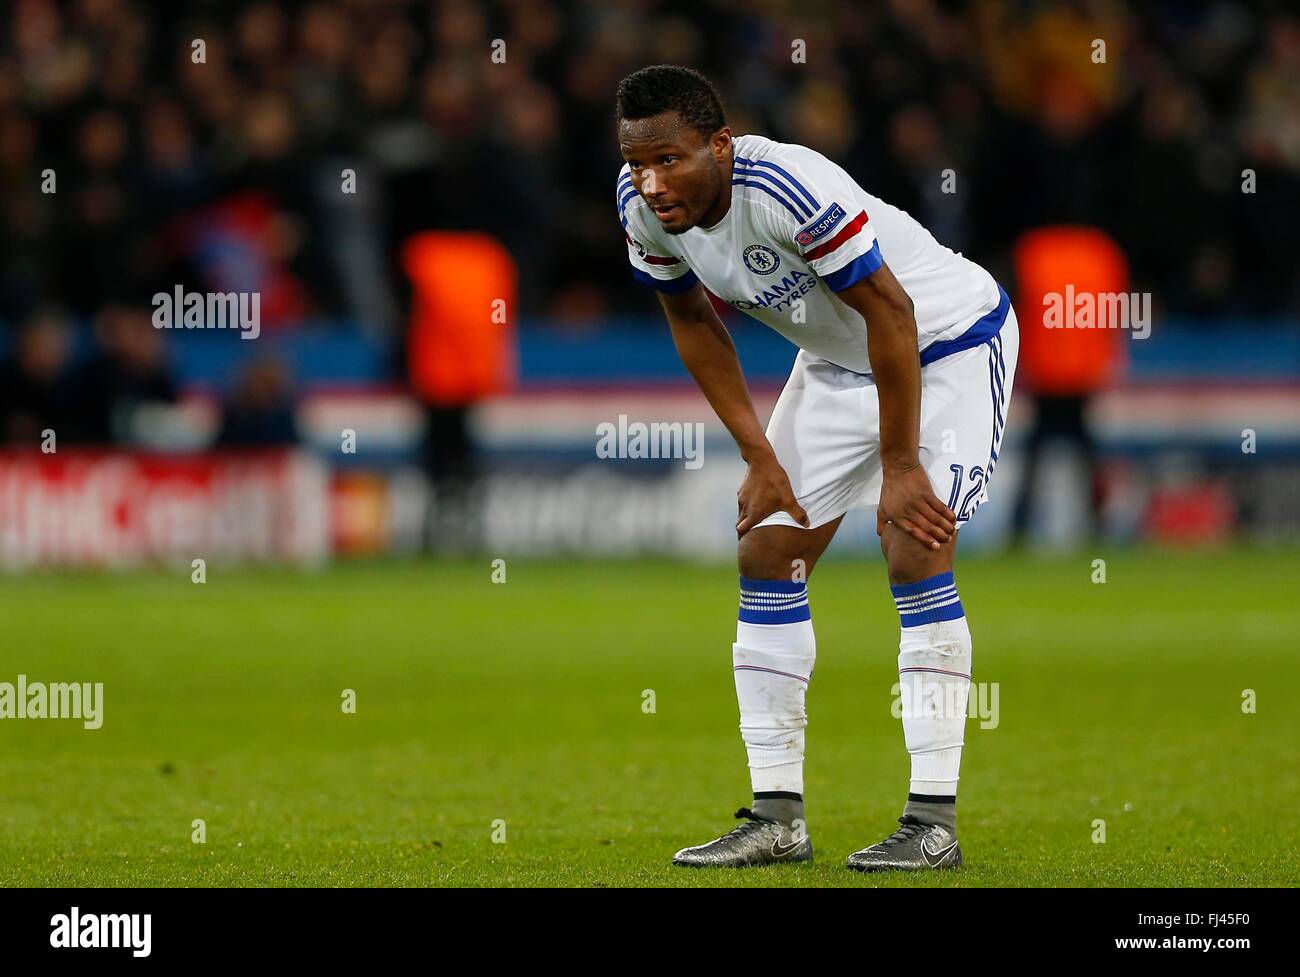 Chelsea’s Mikel John Obi looks dejected after Edinson Cavani's goal during the UEFA Champions League round of 16 match between Paris Saint-Germain and Chelsea at the Parc des Princes Stadium in Paris. February 16, 2016. James Boardman / Telephoto Images +44 7967 642437 Stock Photo